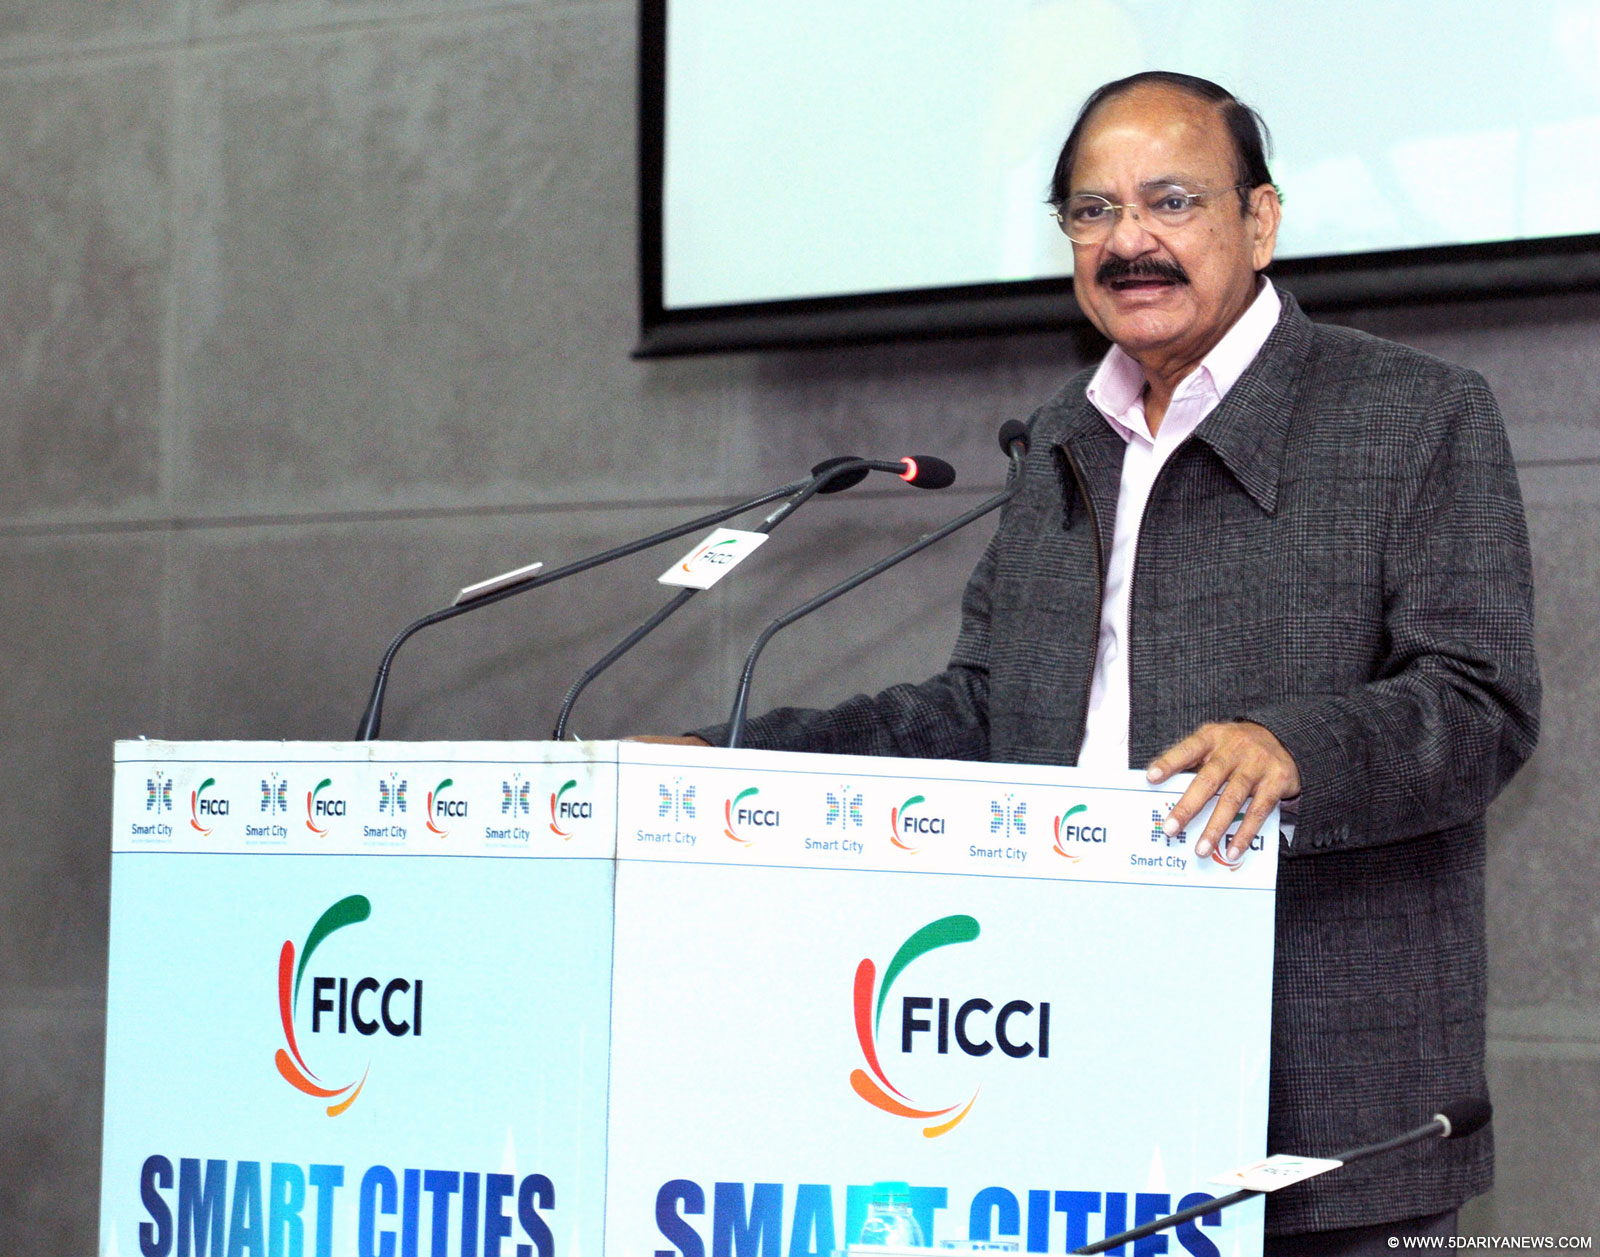 M. Venkaiah Naidu delivering the inaugural address at the Smart Cities Summit 2015, organised by the Federation of Indian Chambers of Commerce & Industry (FICCI), in New Delhi on October 08, 2015.